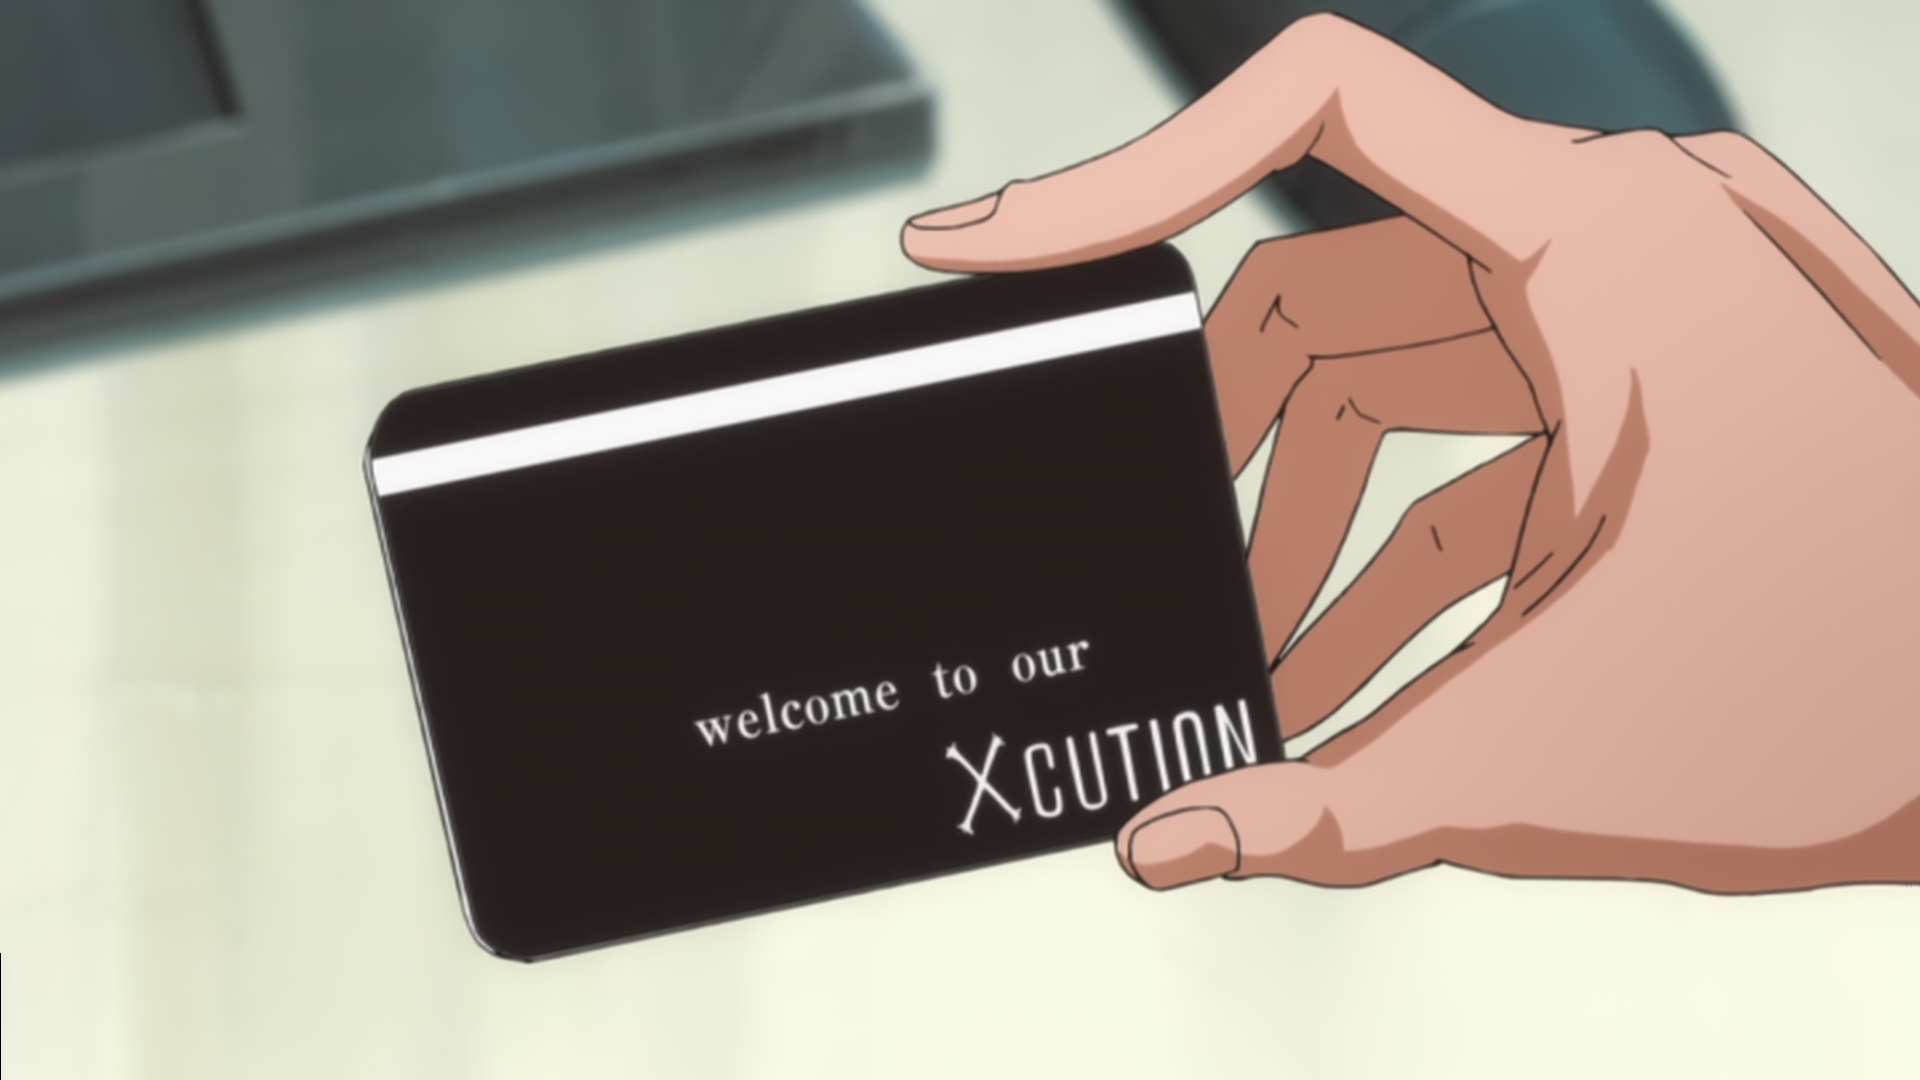 http://img1.wikia.nocookie.net/__cb20140505234513/bleach/en/images/a/a0/Ep344XcutionCard.png